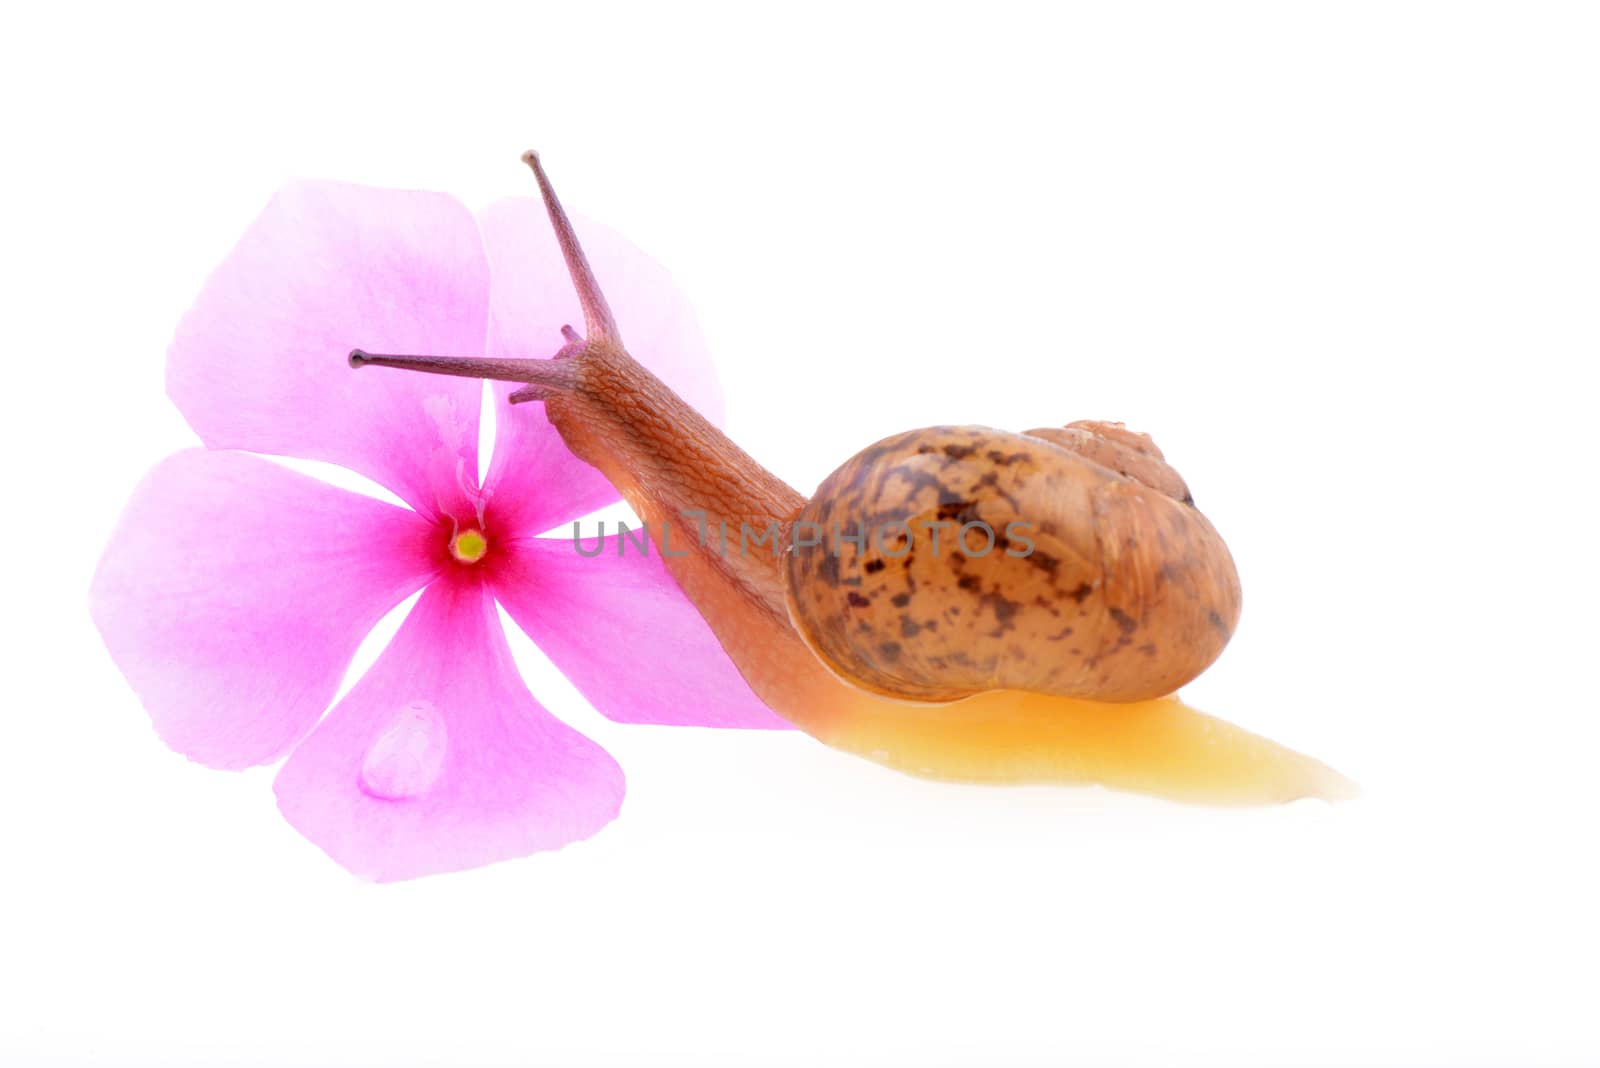 Snail with a purple flower on a white background